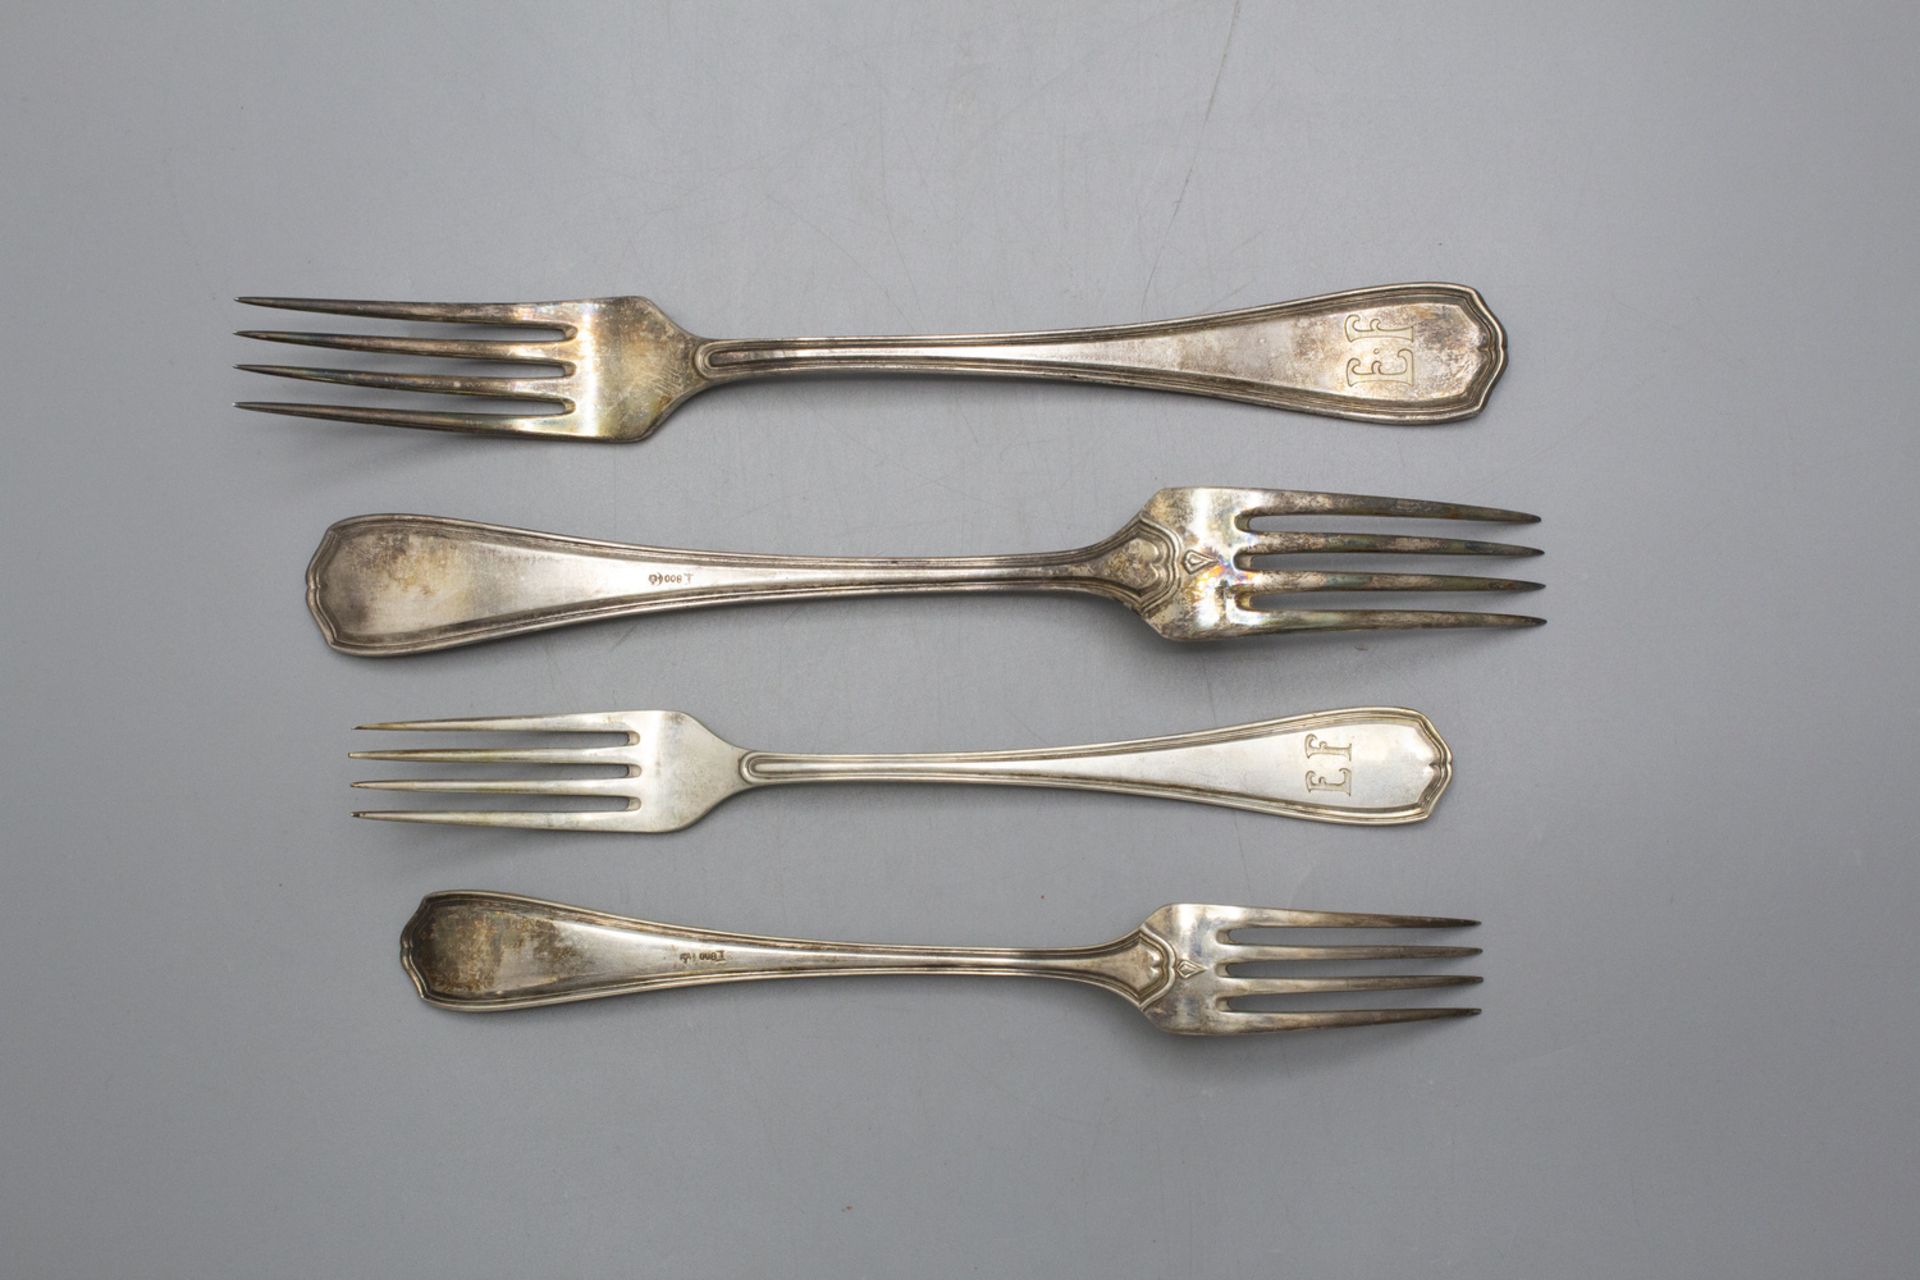 Silberbesteck / A set of silver cutlery - Image 5 of 7